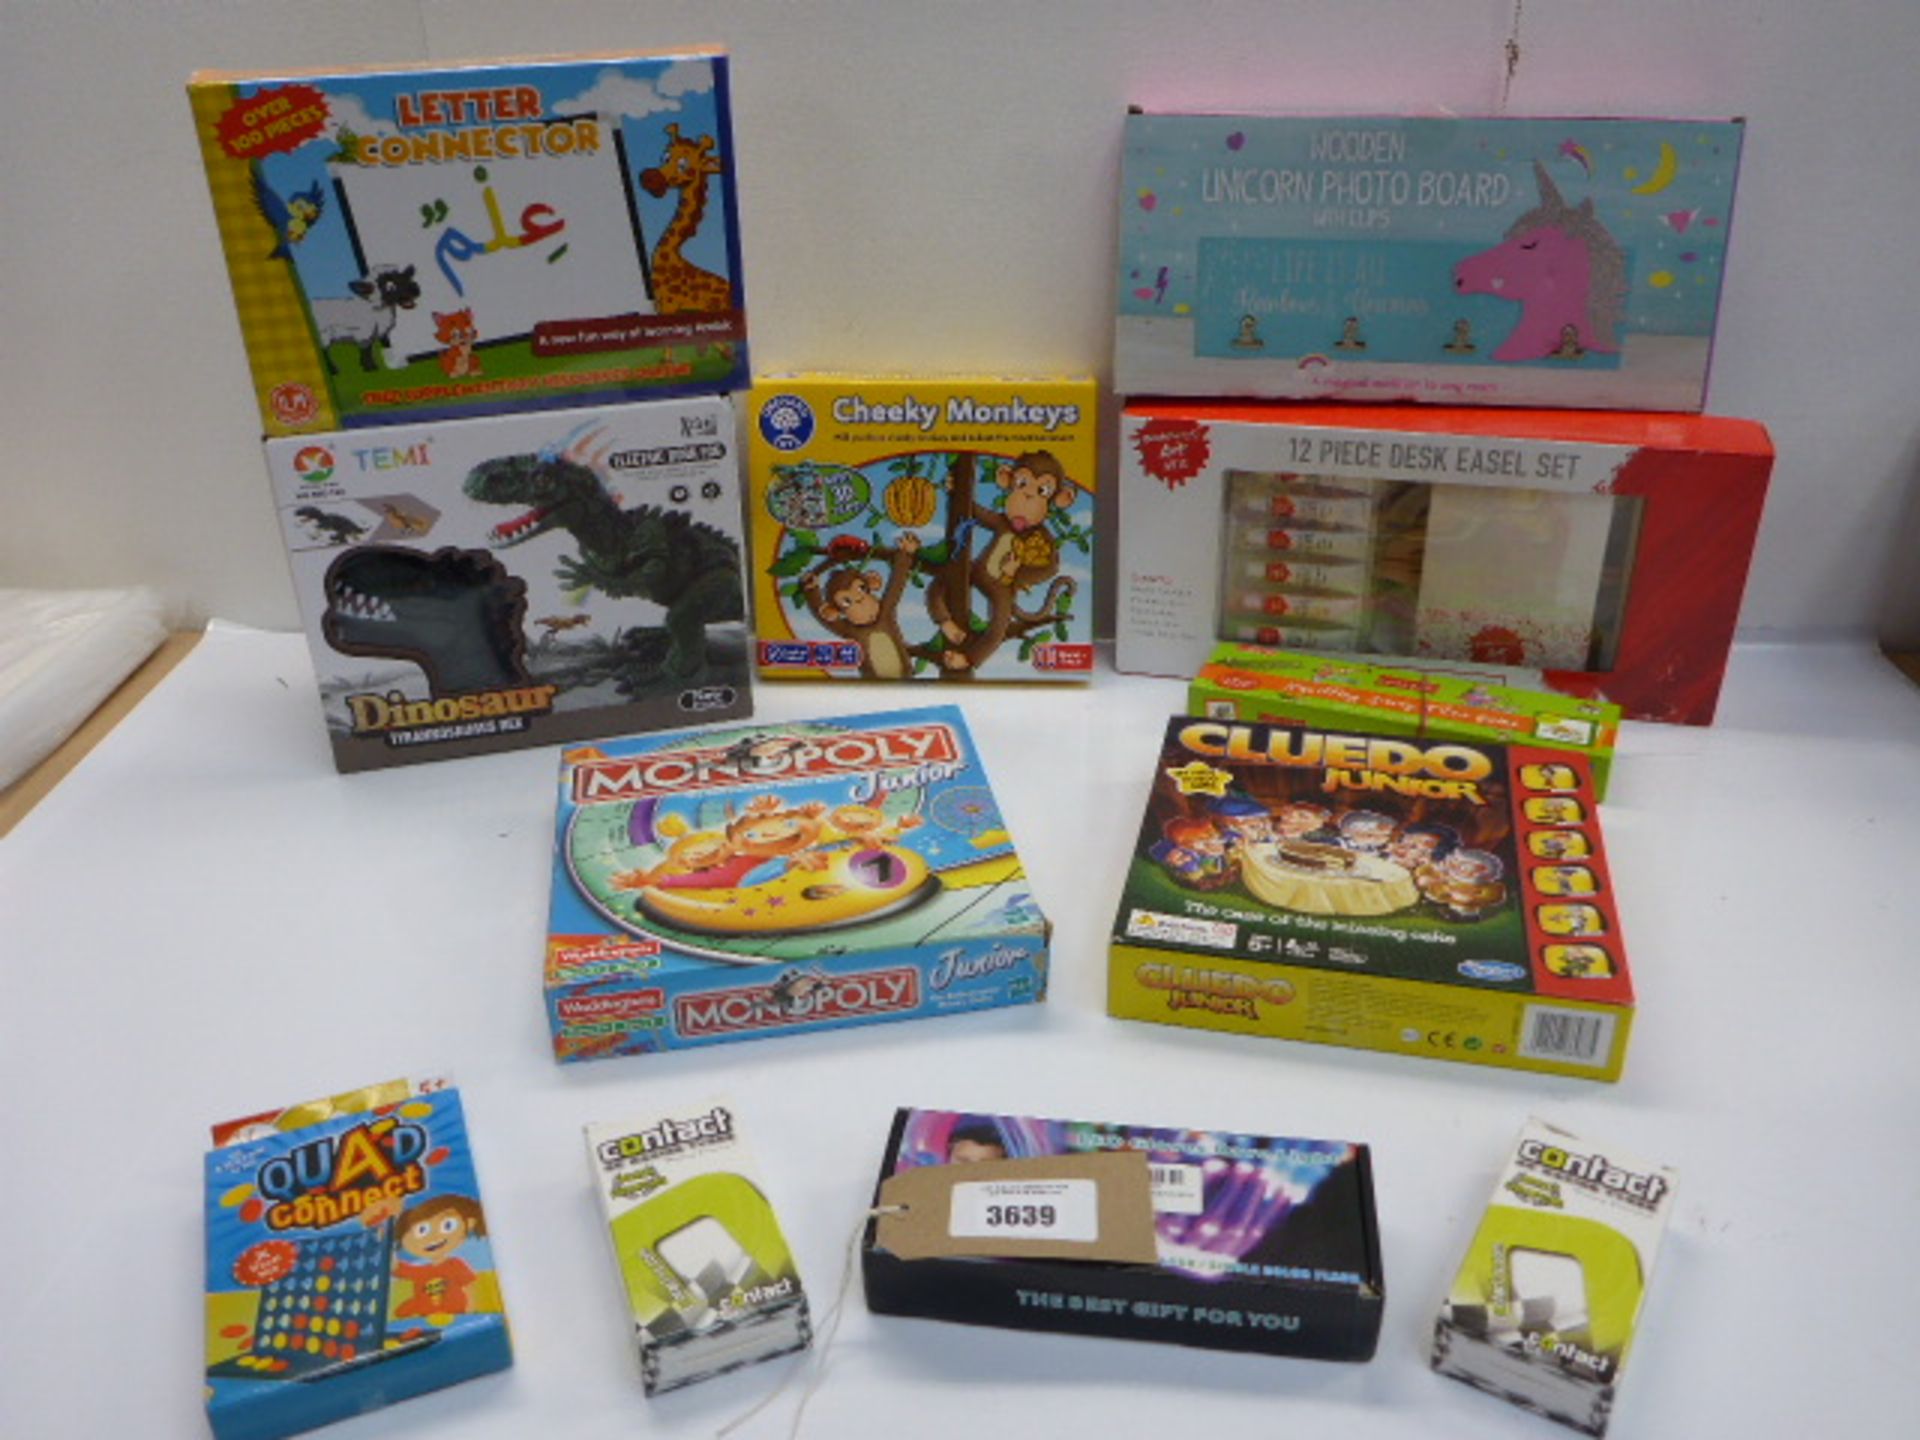 12 boxed games including Letter Connector, Dinosaur T-Rex, Junior Monopoly, Cludo Junior, Cheeky